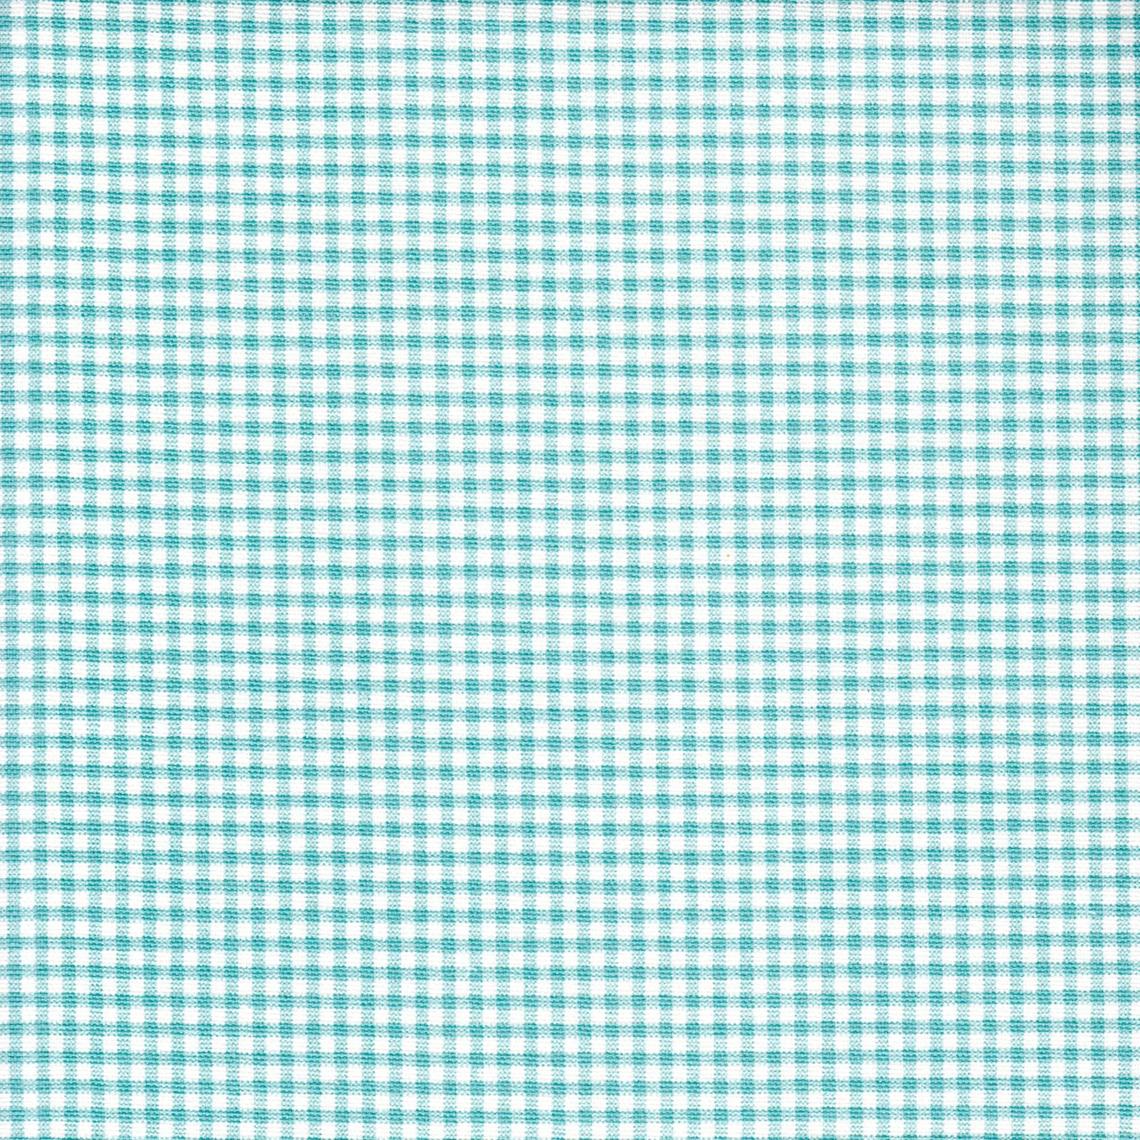 shower curtain in farmhouse turquoise blue gingham check on cream